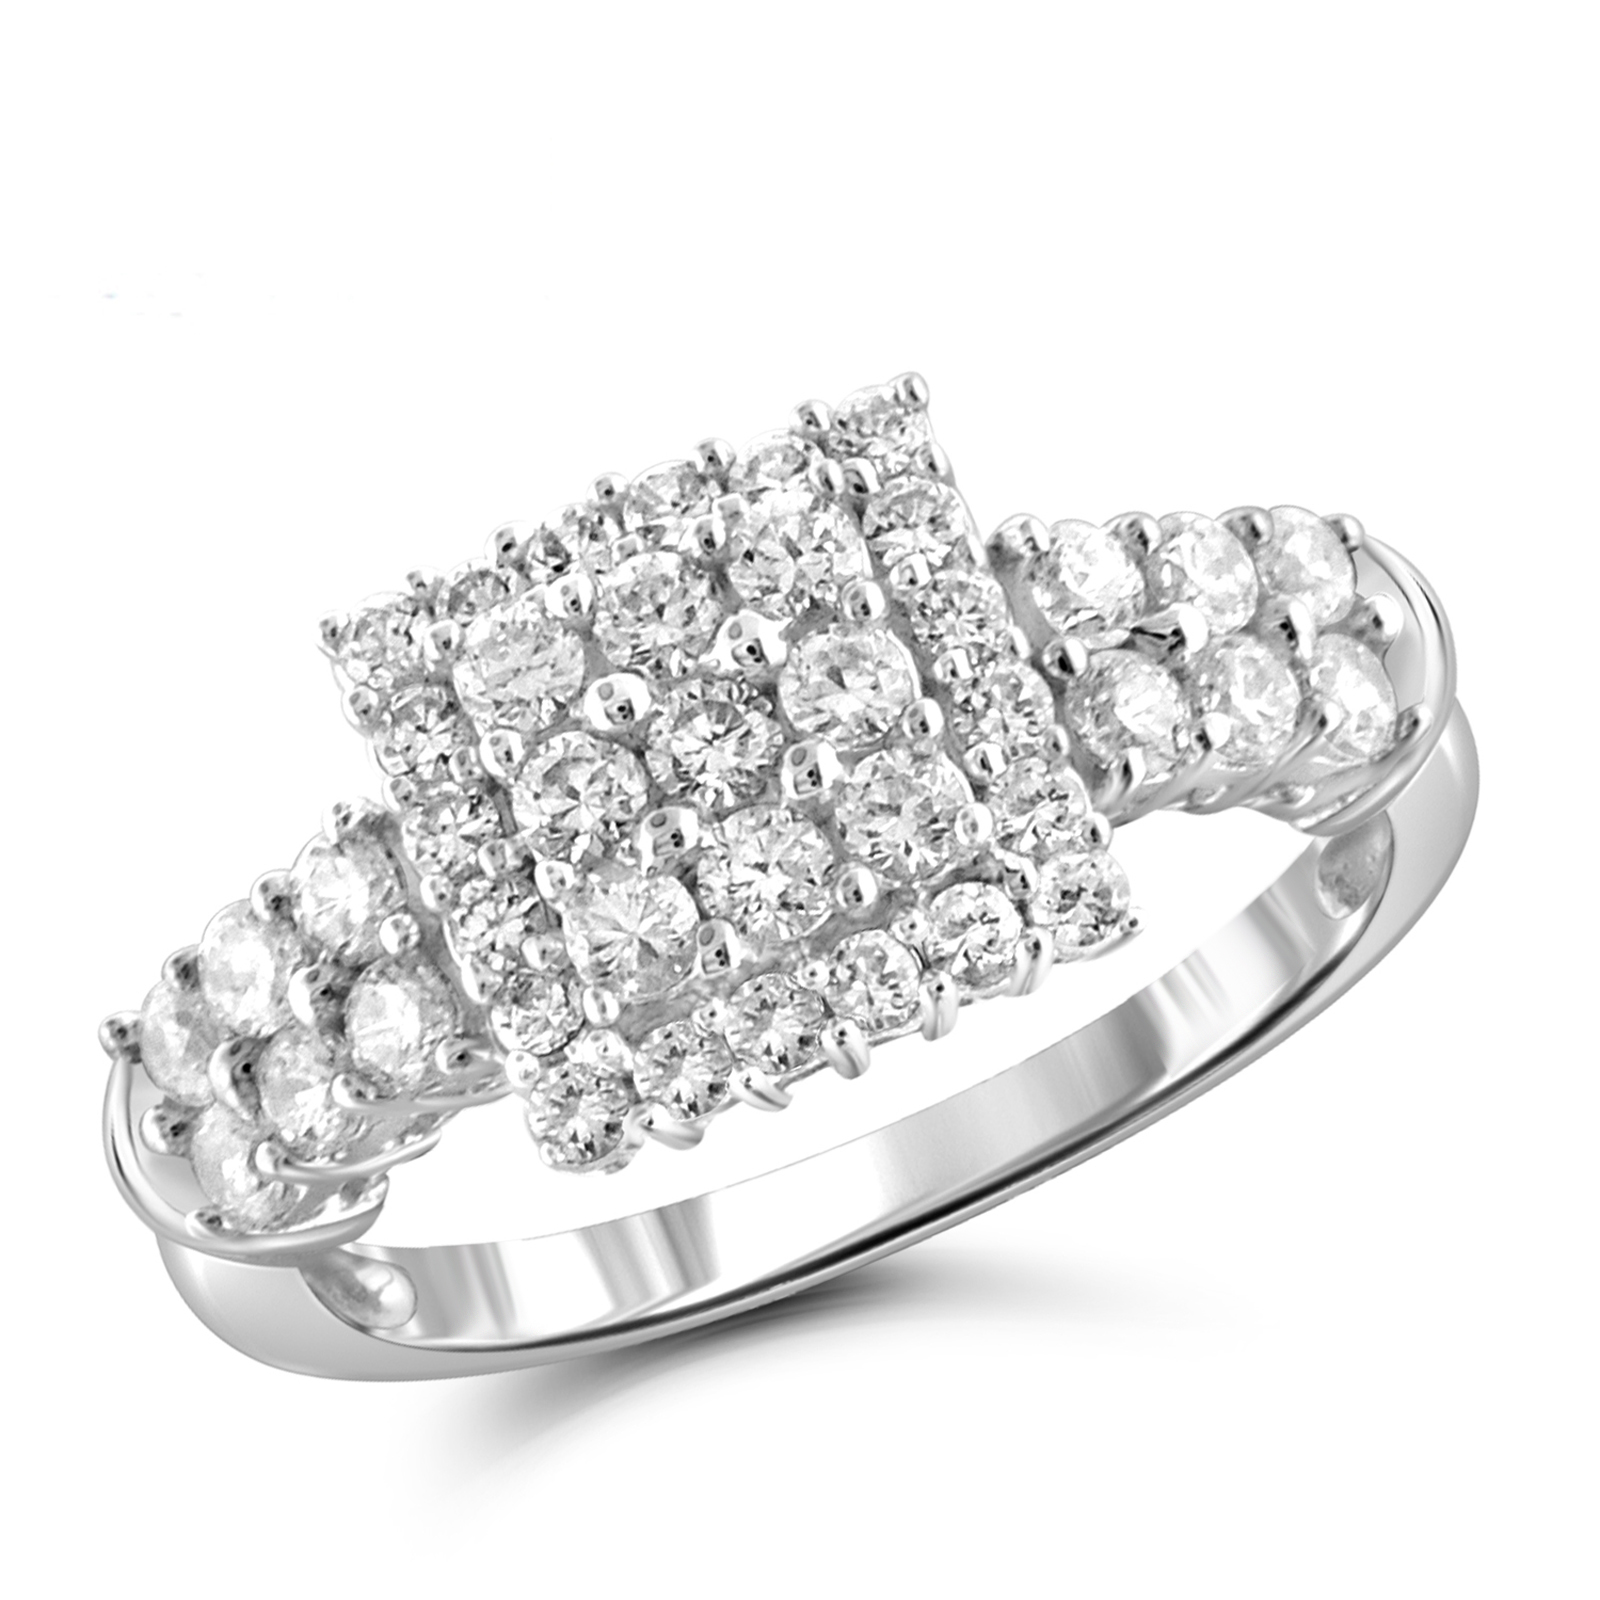 Tradition Diamond 10K White Gold 1.00 CTTW Round Certified Diamond Ring - Size 7 Only